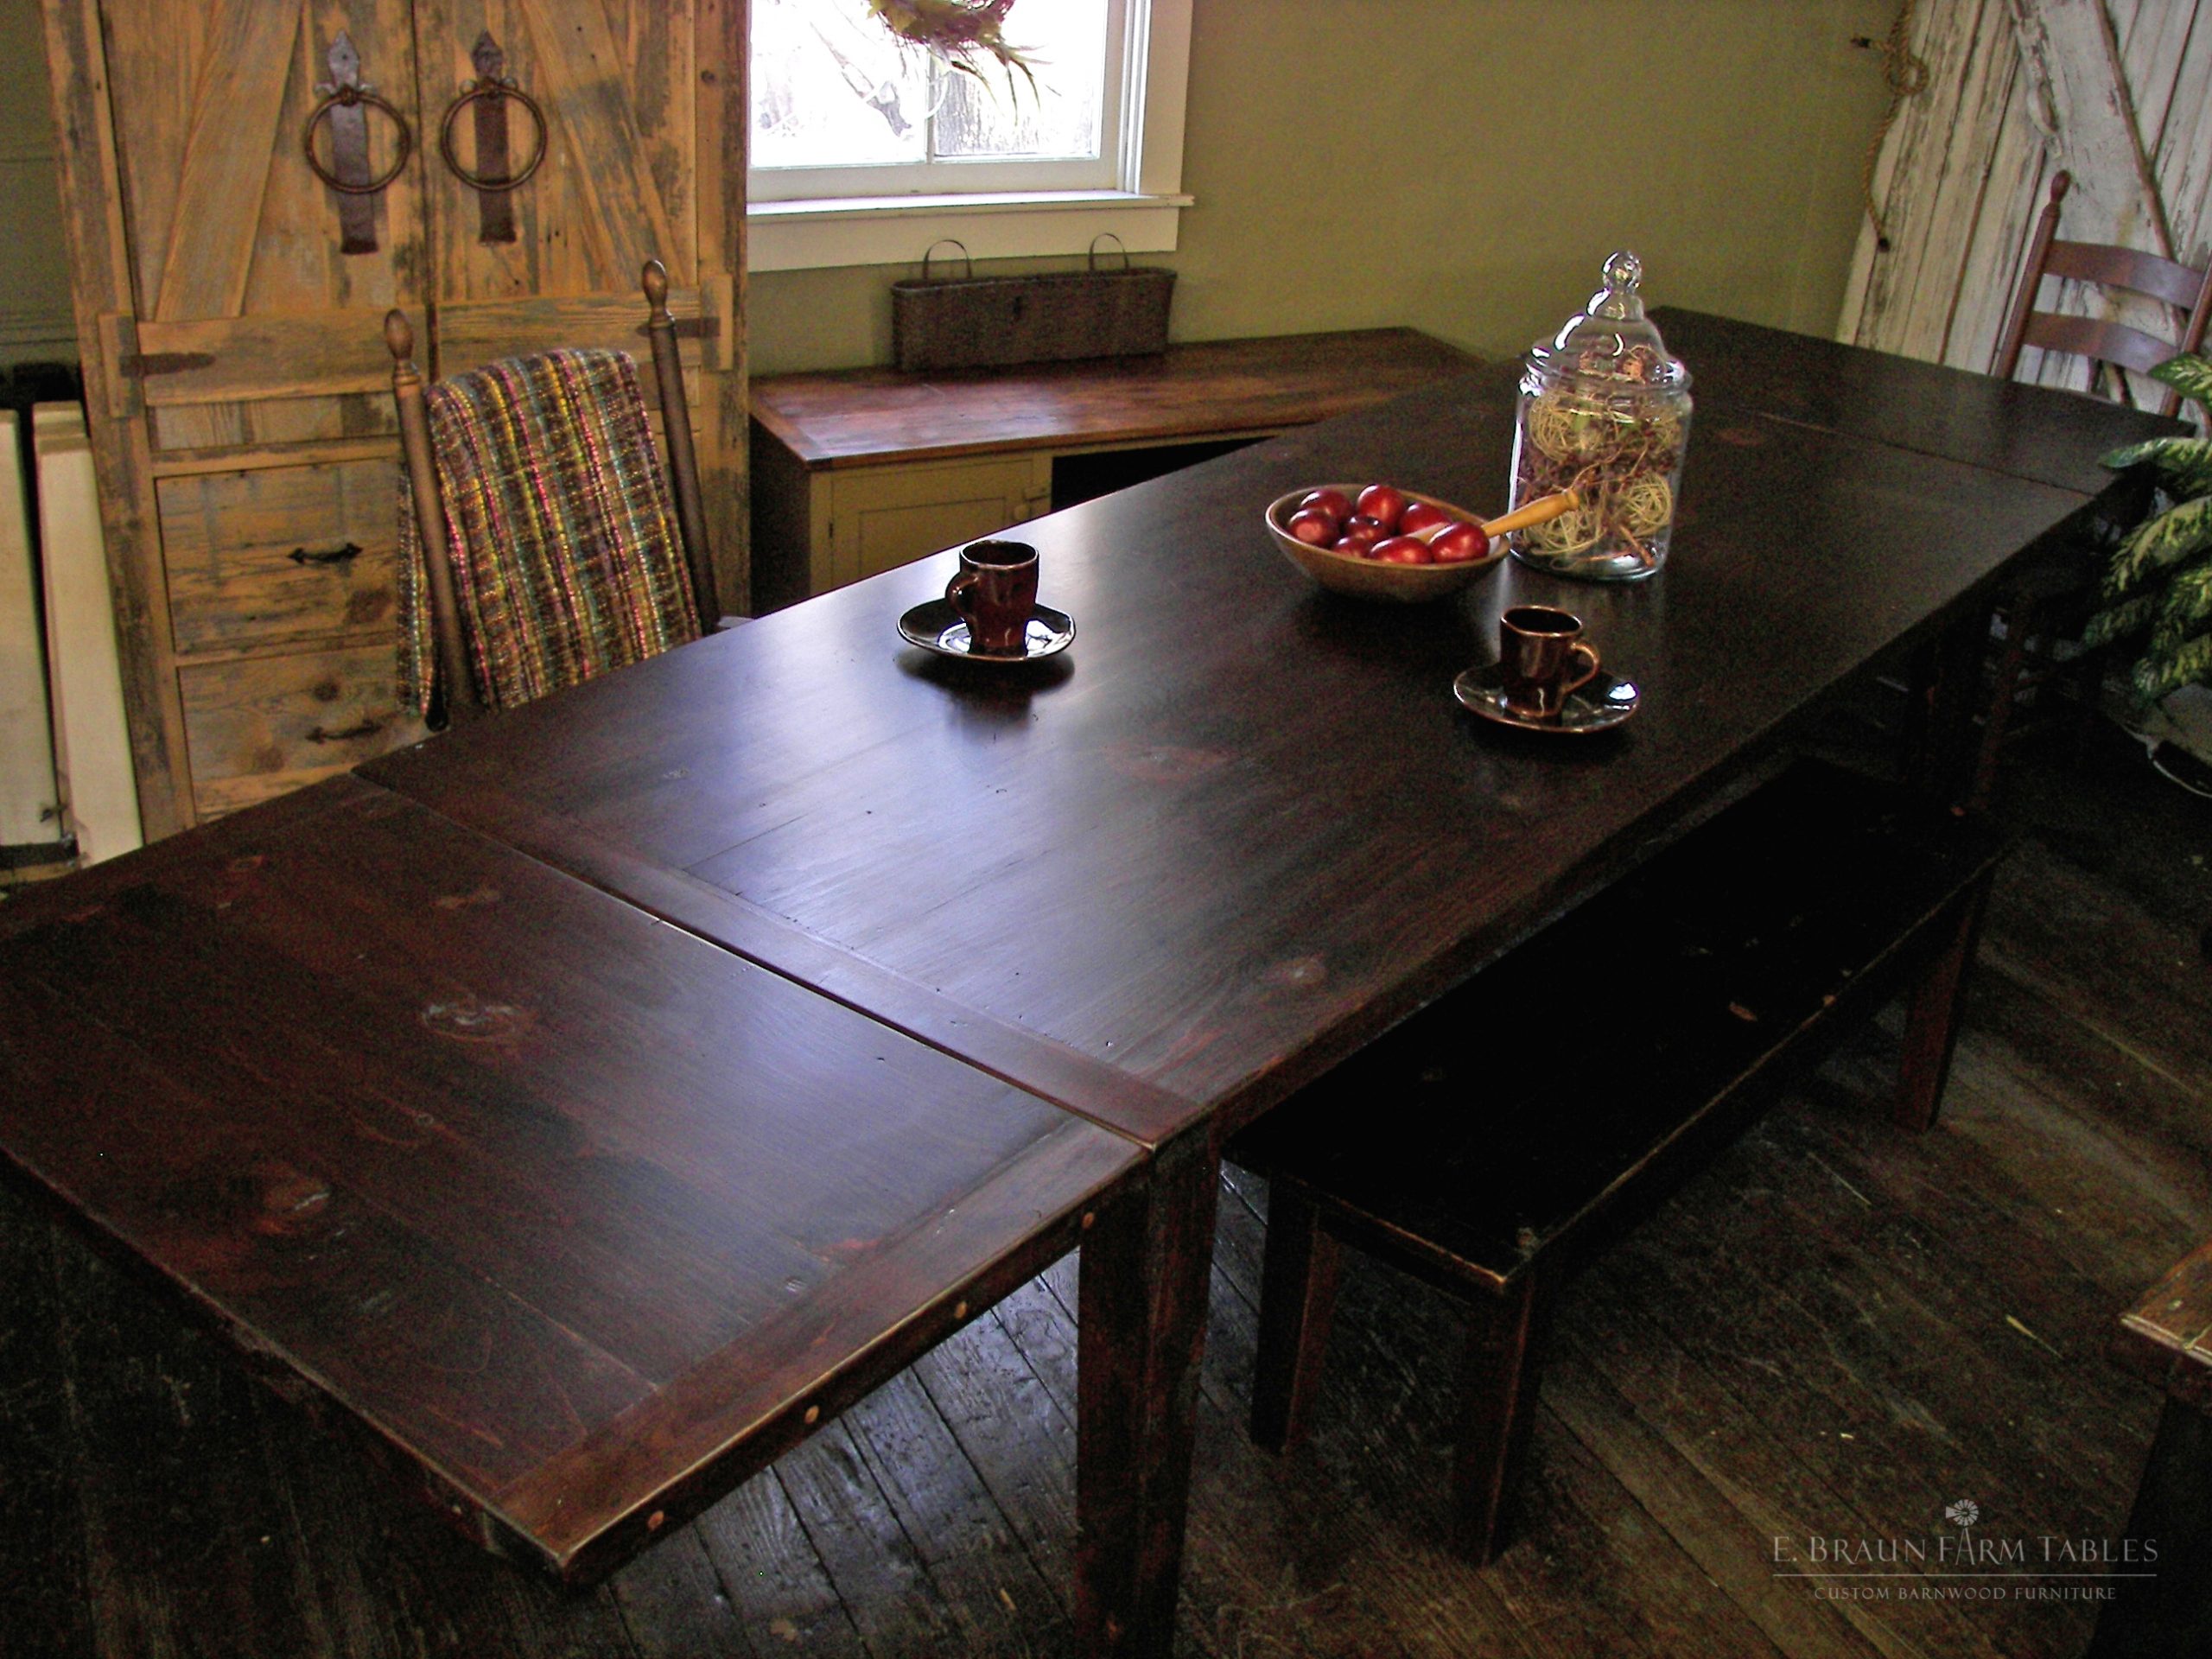 9 Foot Dining Room Table With Chairs